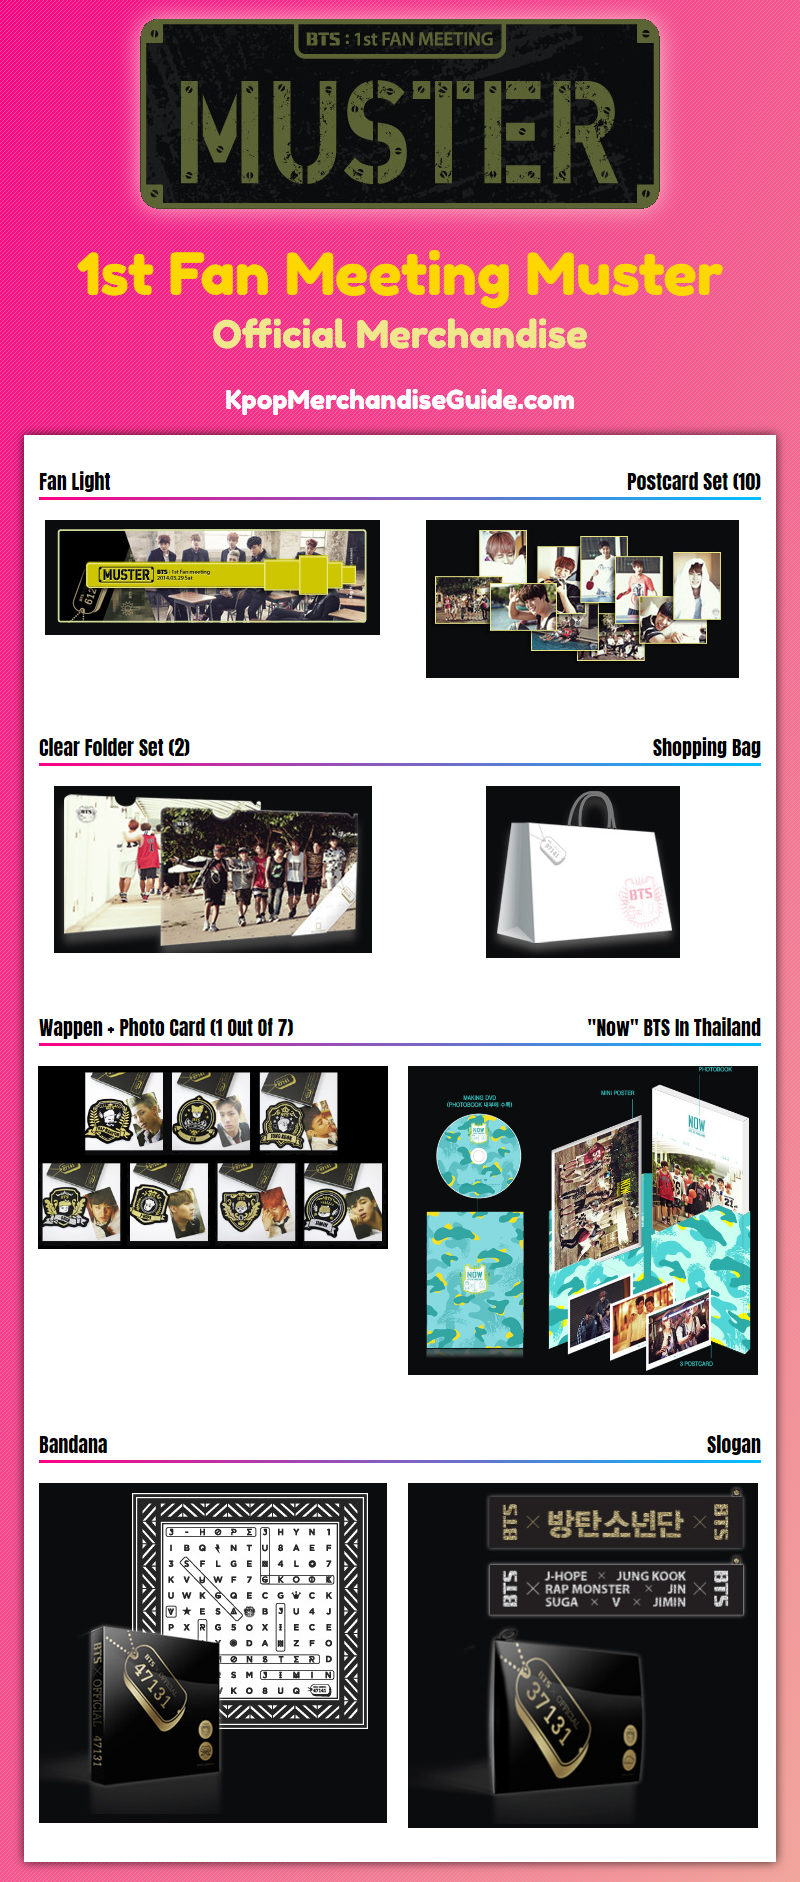 BTS 1st Fanmeeting Muster Merchandise